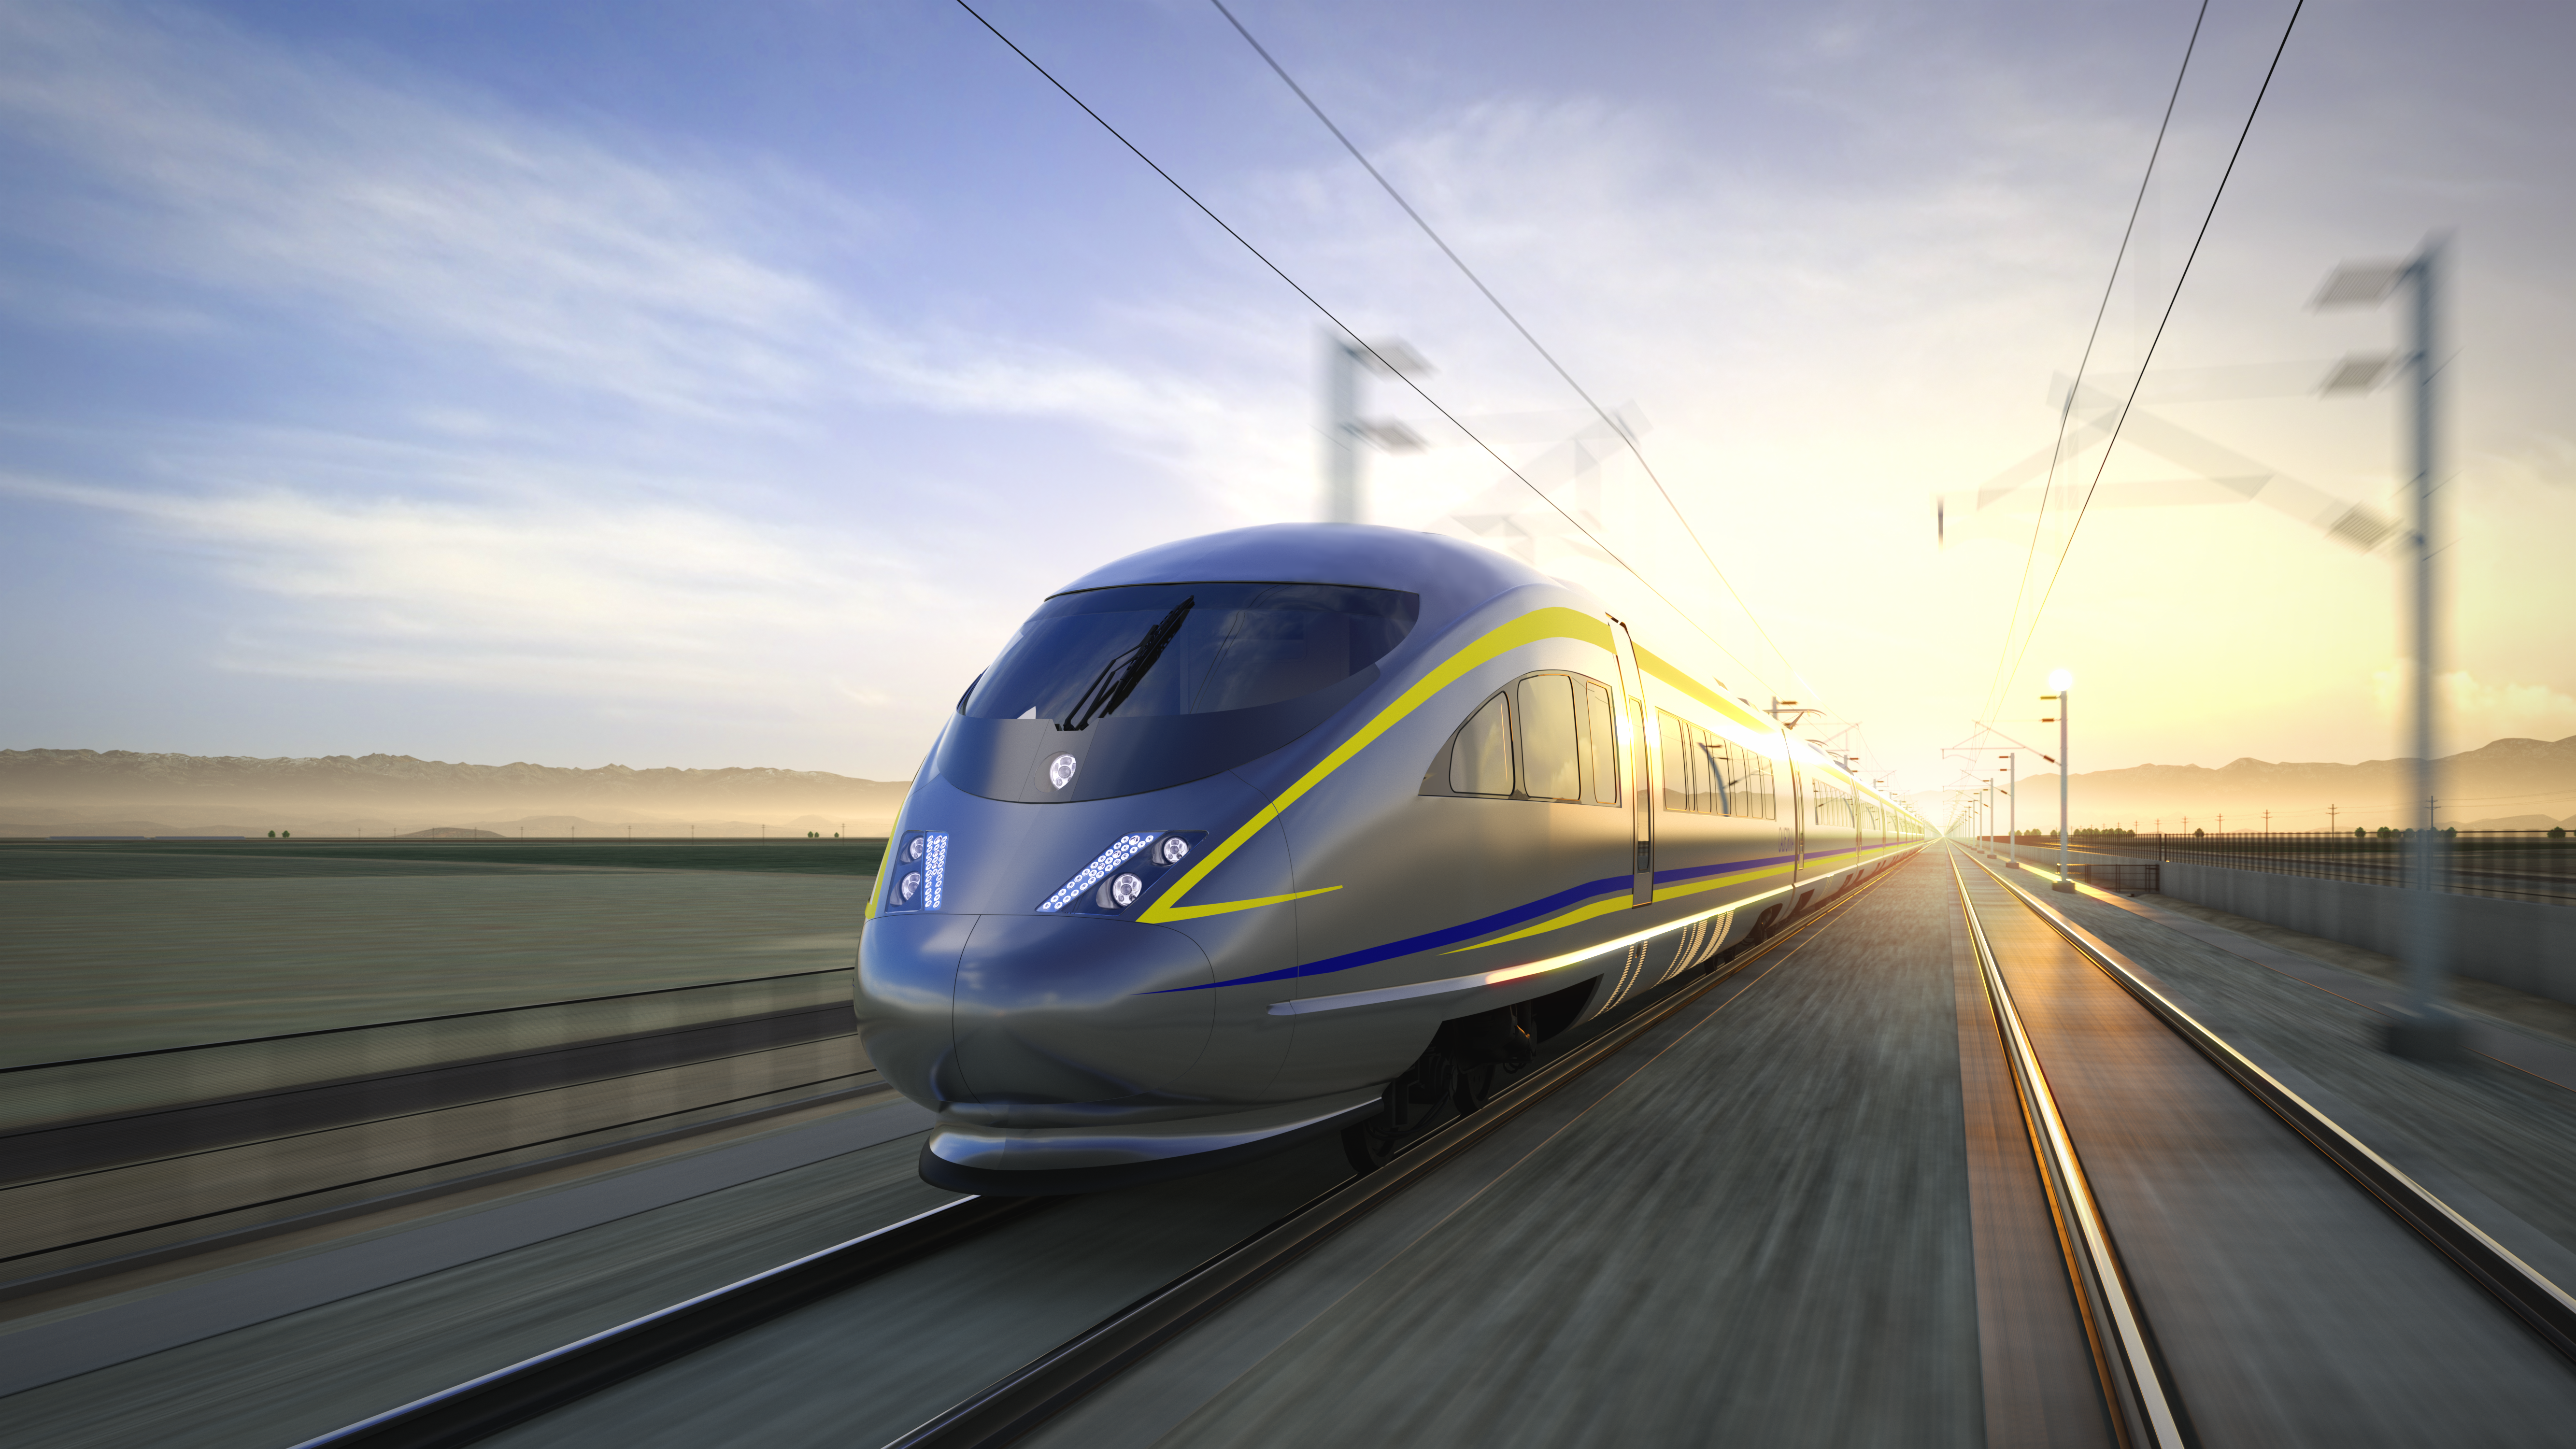 California High-Speed Rail Authority to Receive $3.1bn in Federal Funding